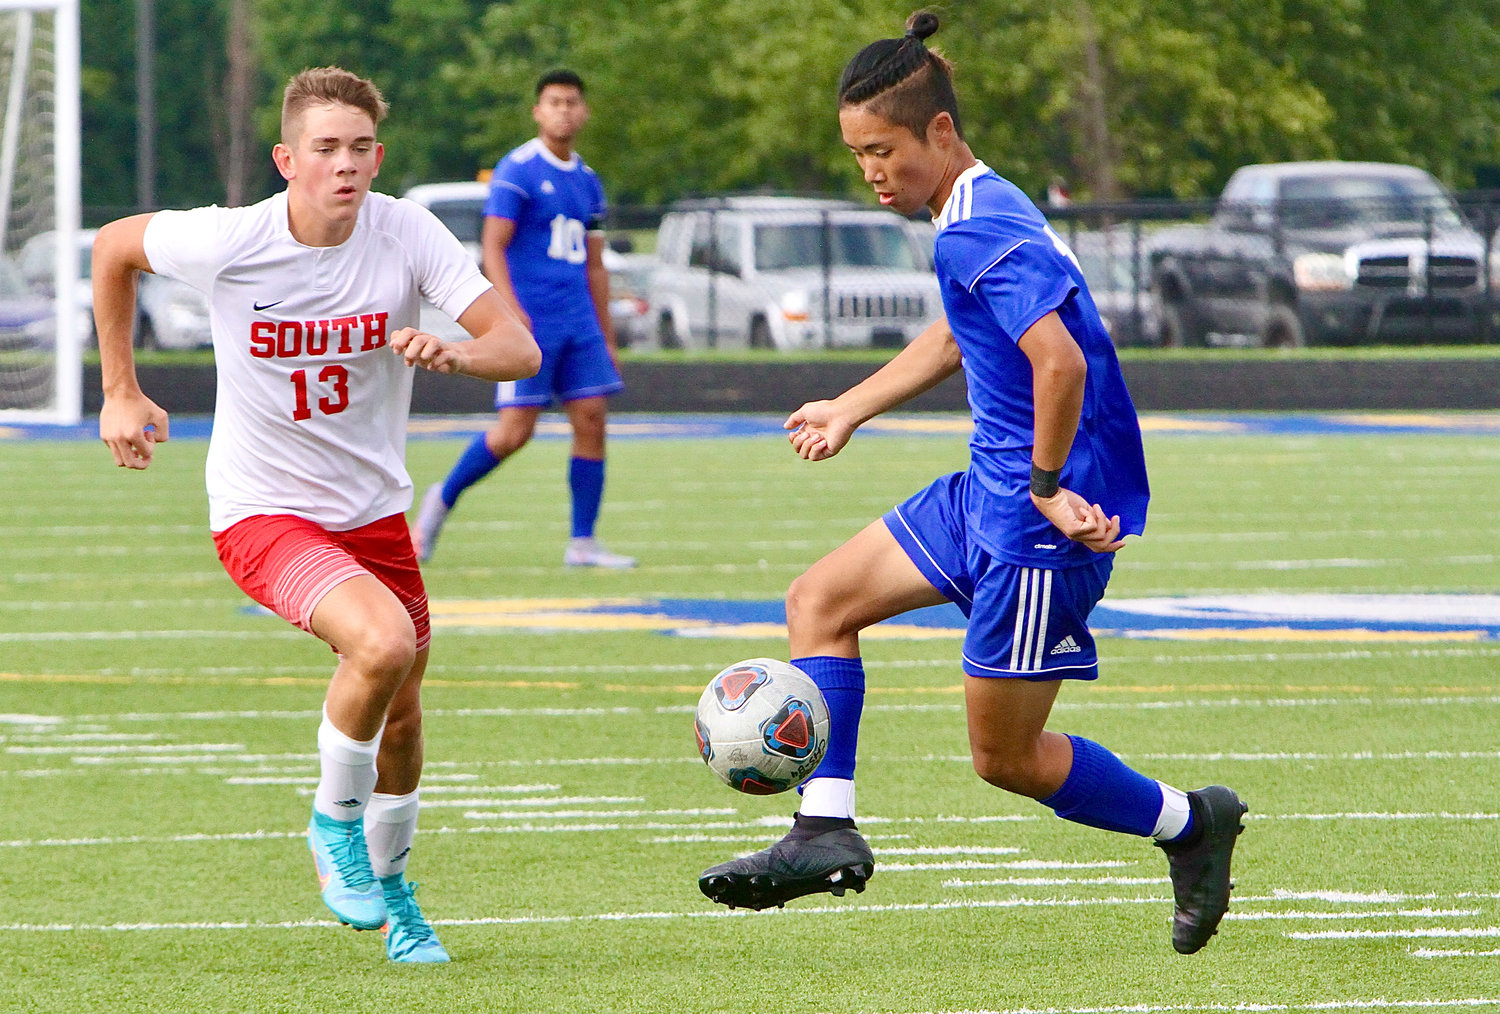 Ryo Nishina got in on the scoring action with a hat trick of his own for CHS.